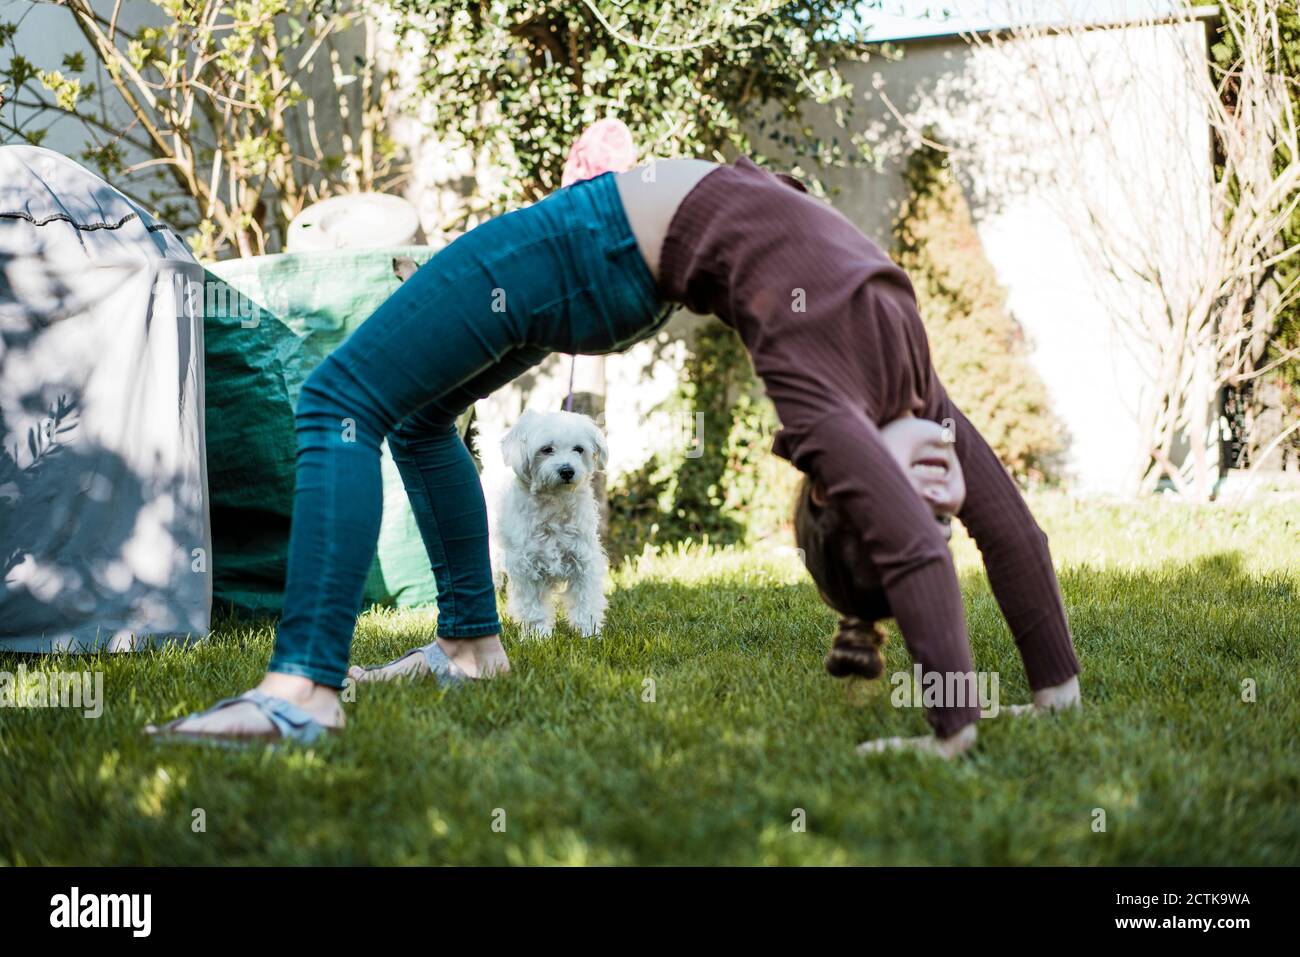 Girl exercising while balancing over grass by dog in yard Stock Photo